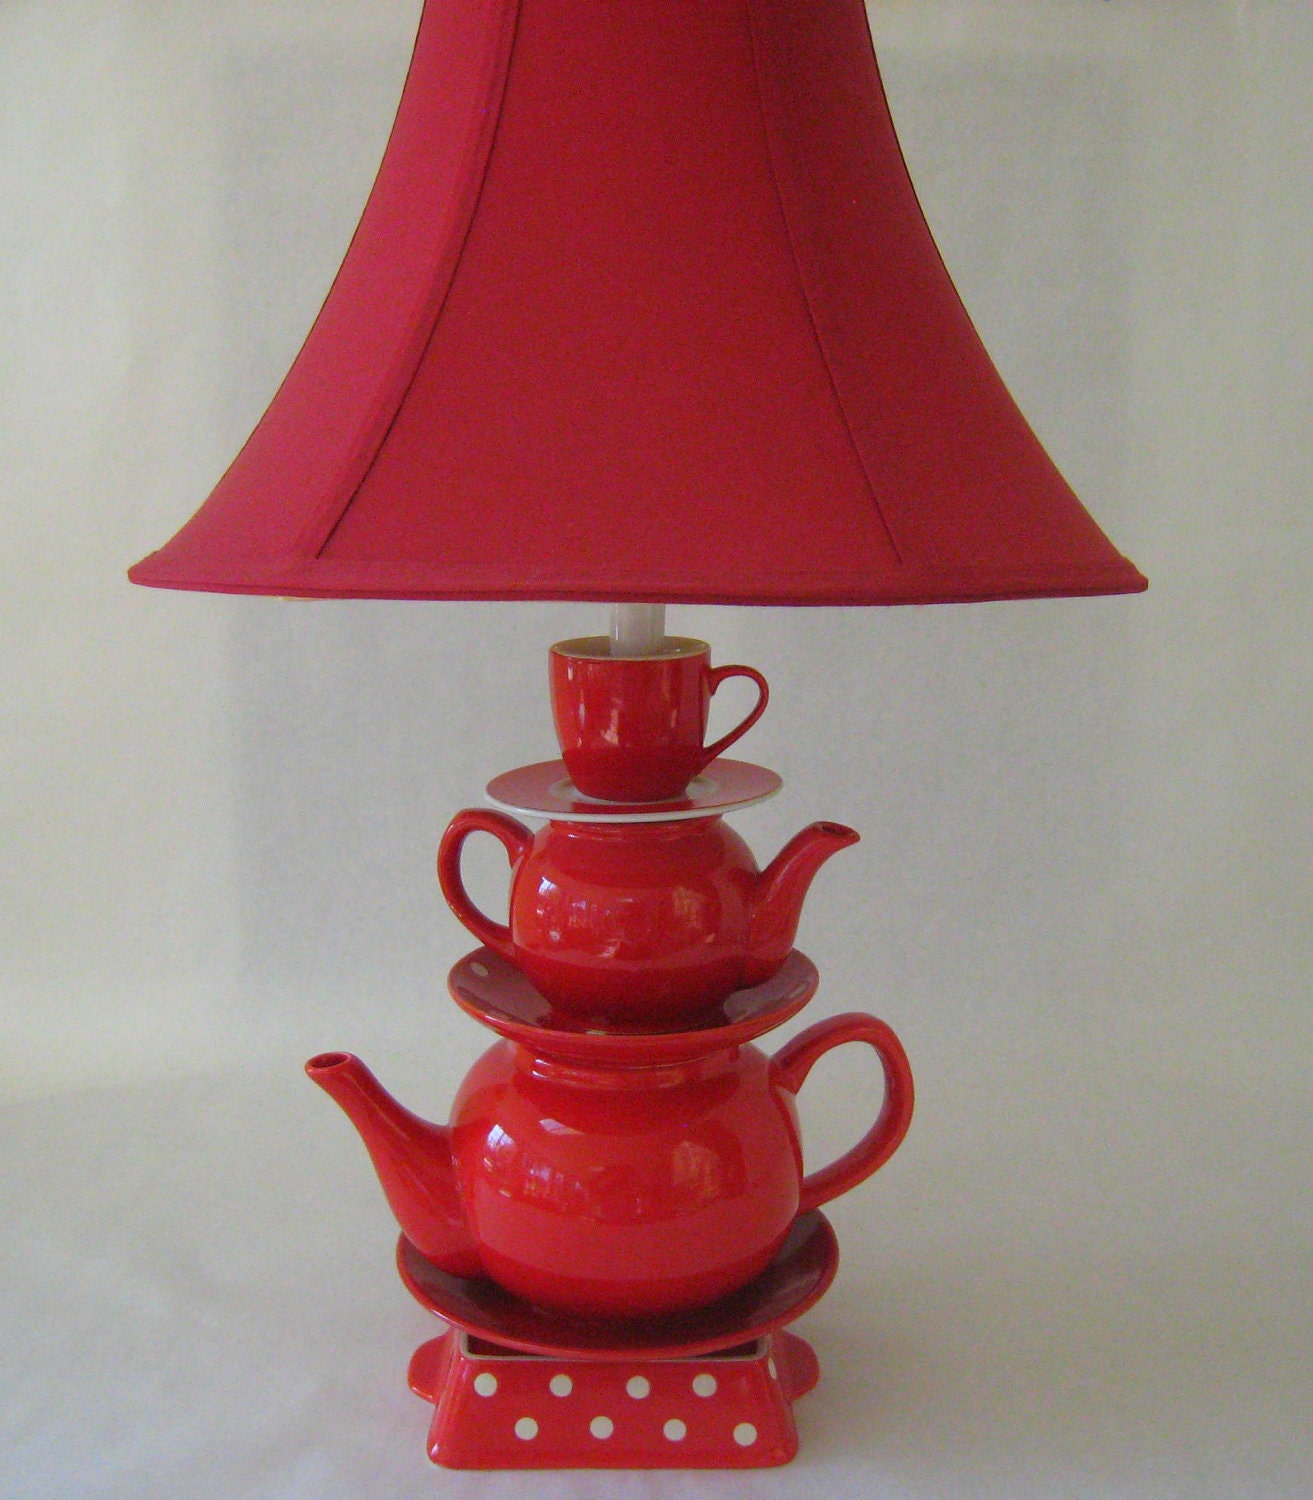 Teapot Lamp, Red Teapots Tea Cup and Saucer with Polka Dots  Country Cottage